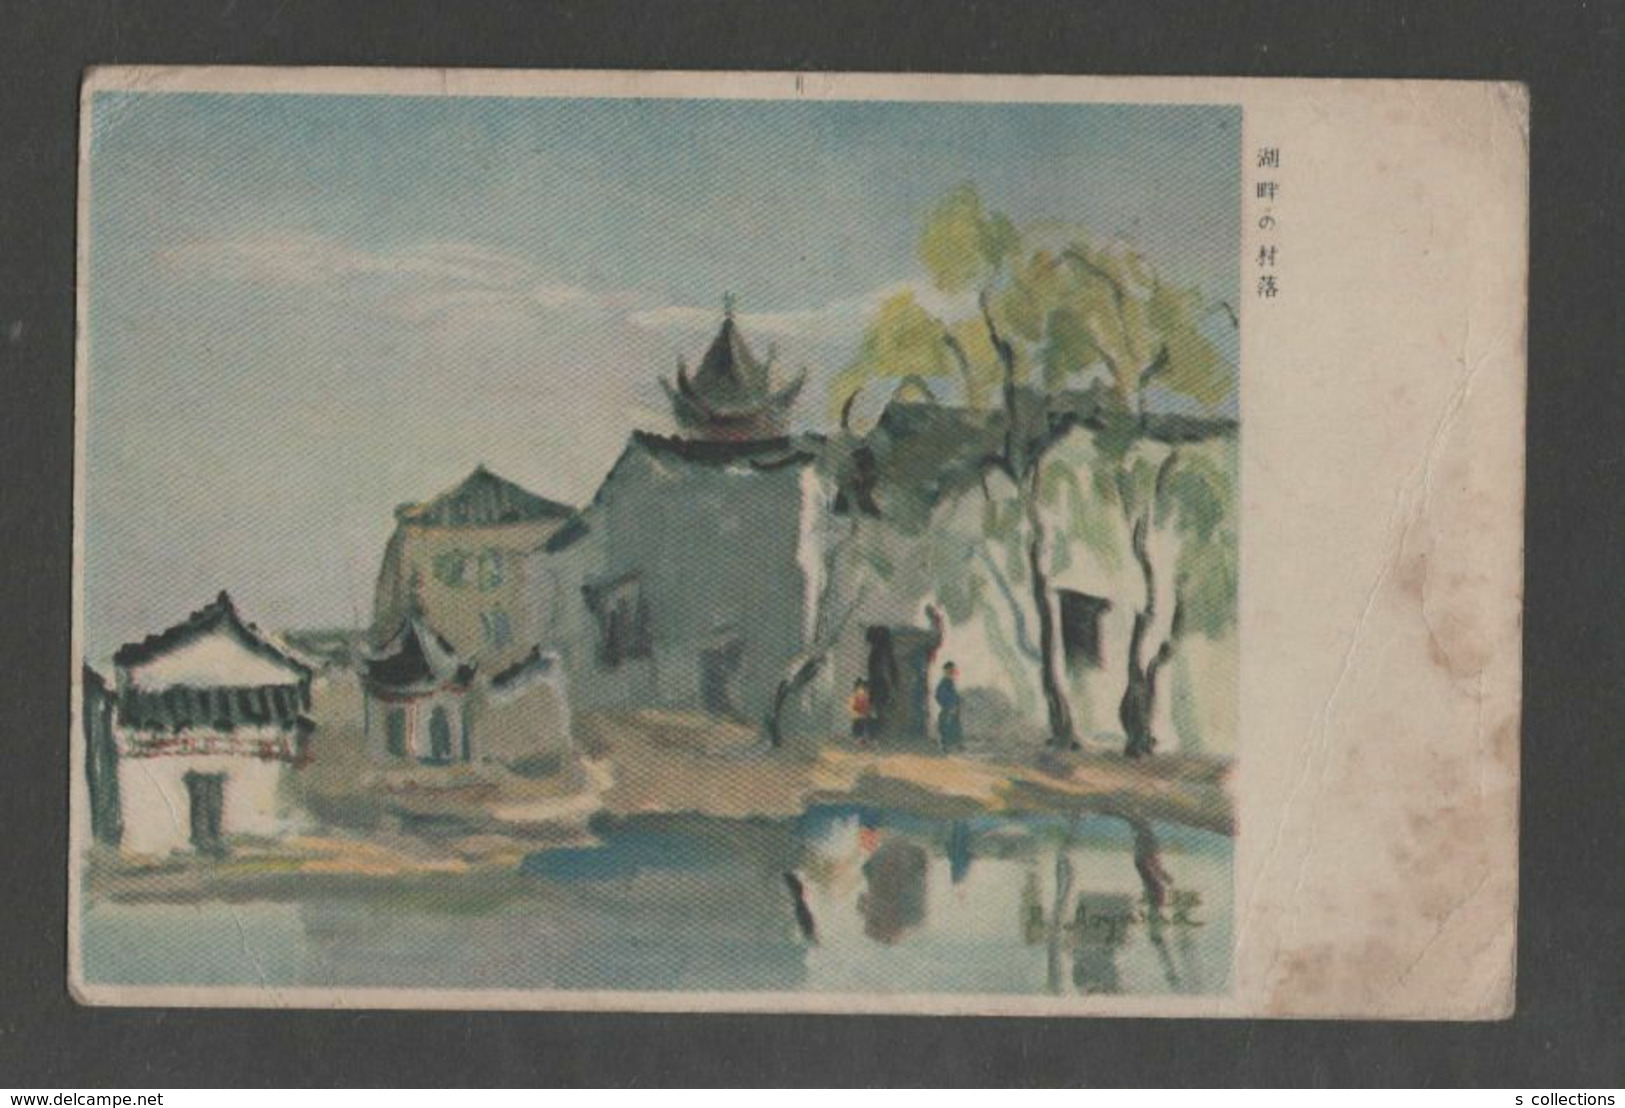 JAPAN WWII Military Lakeside Village Picture Postcard CENTRAL CHINA WW2 MANCHURIA CHINE MANDCHOUKOUO JAPON GIAPPONE - 1943-45 Shanghai & Nankin